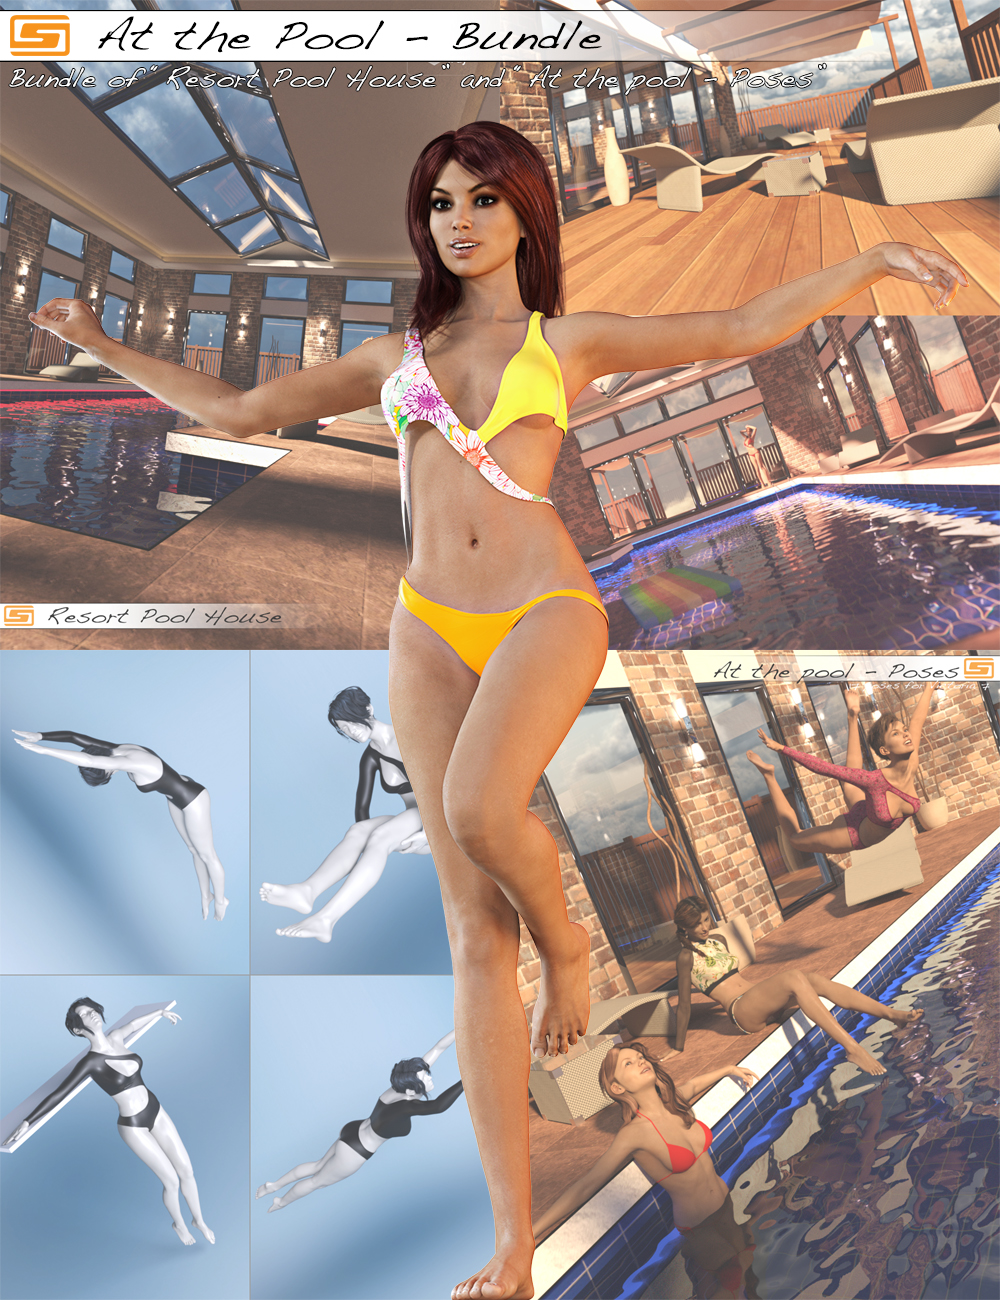 At the Pool - Bundle by: Sedor, 3D Models by Daz 3D